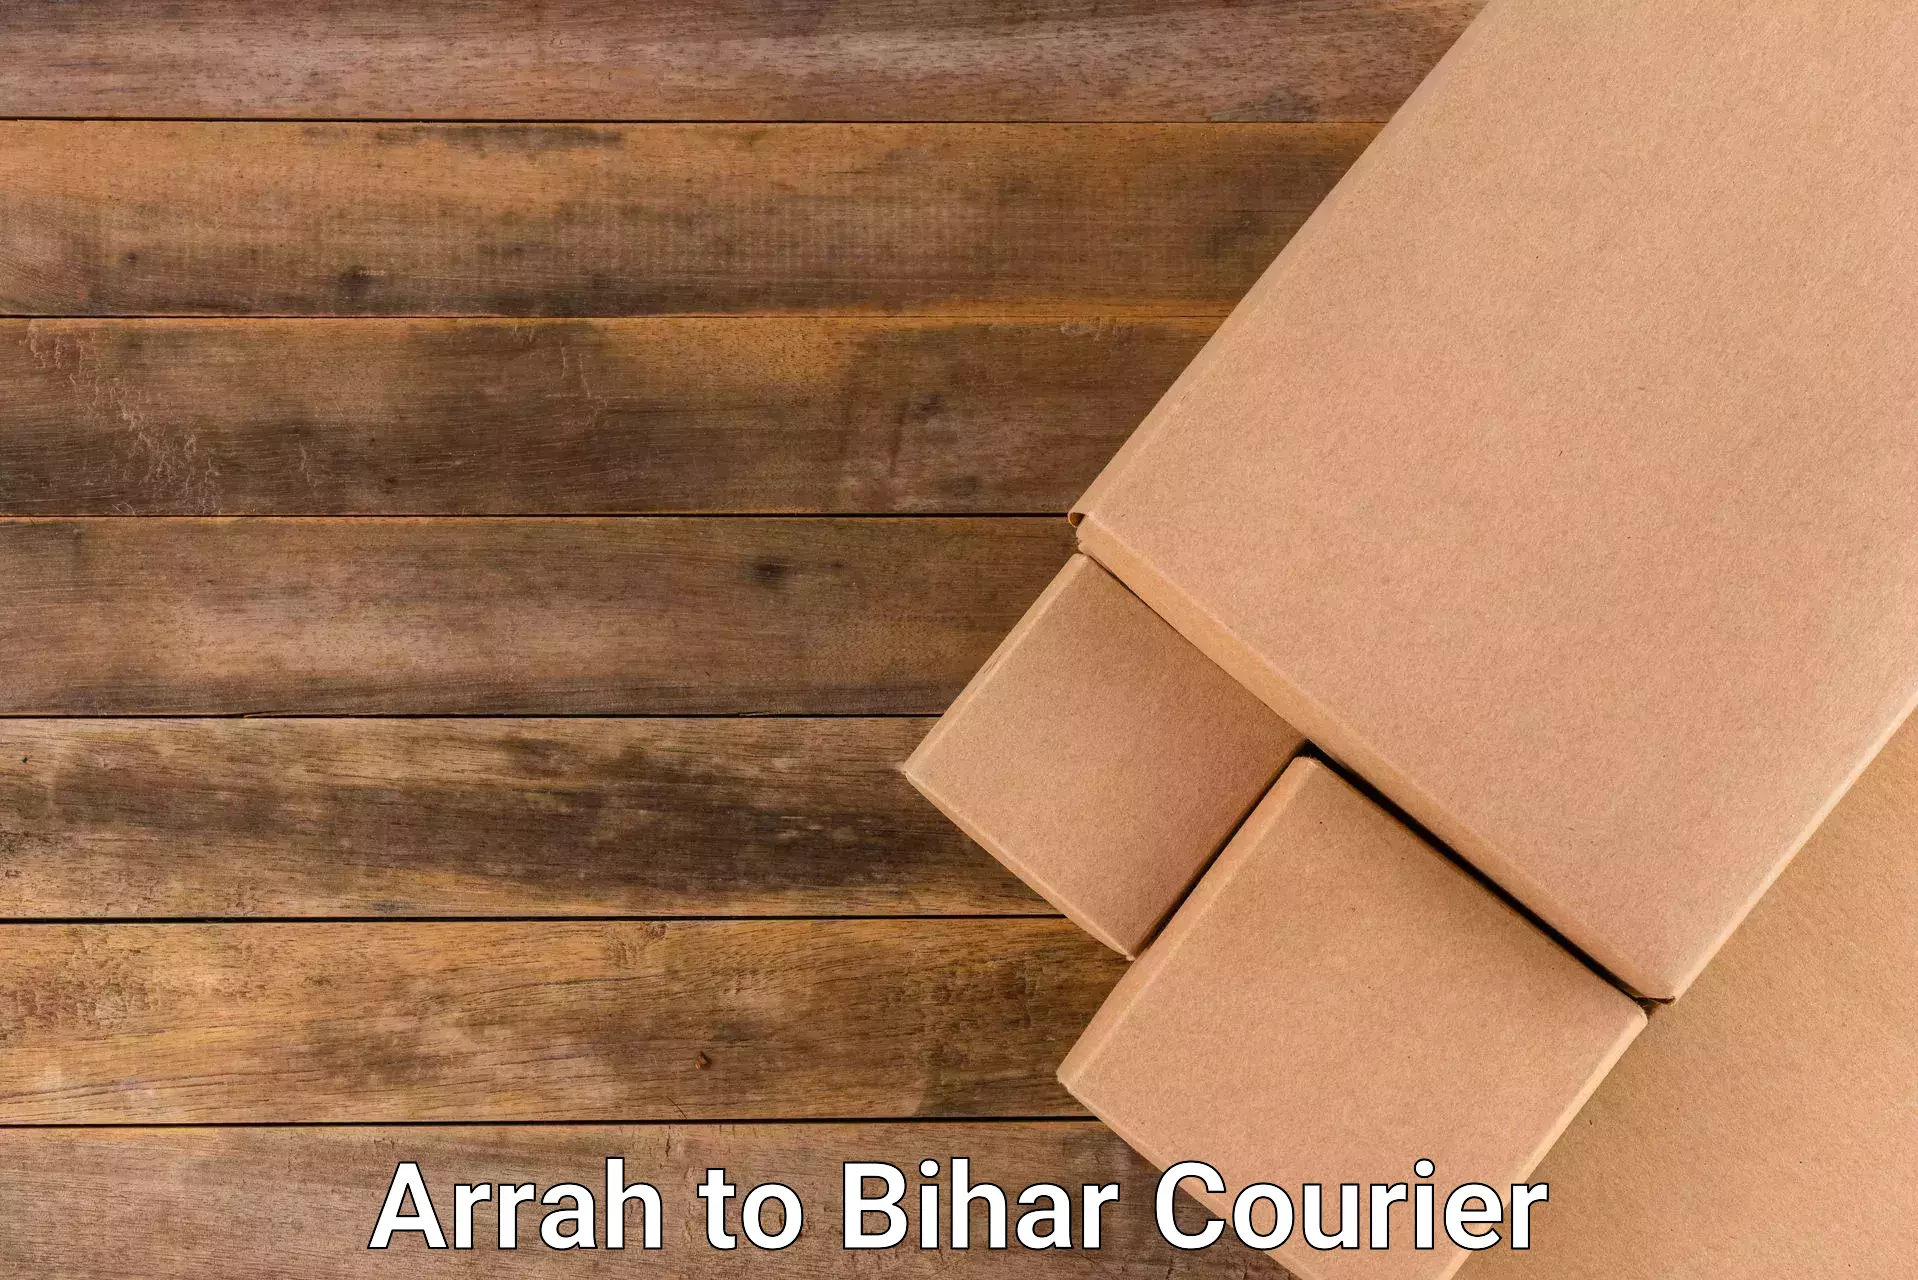 Global shipping networks Arrah to Buxar